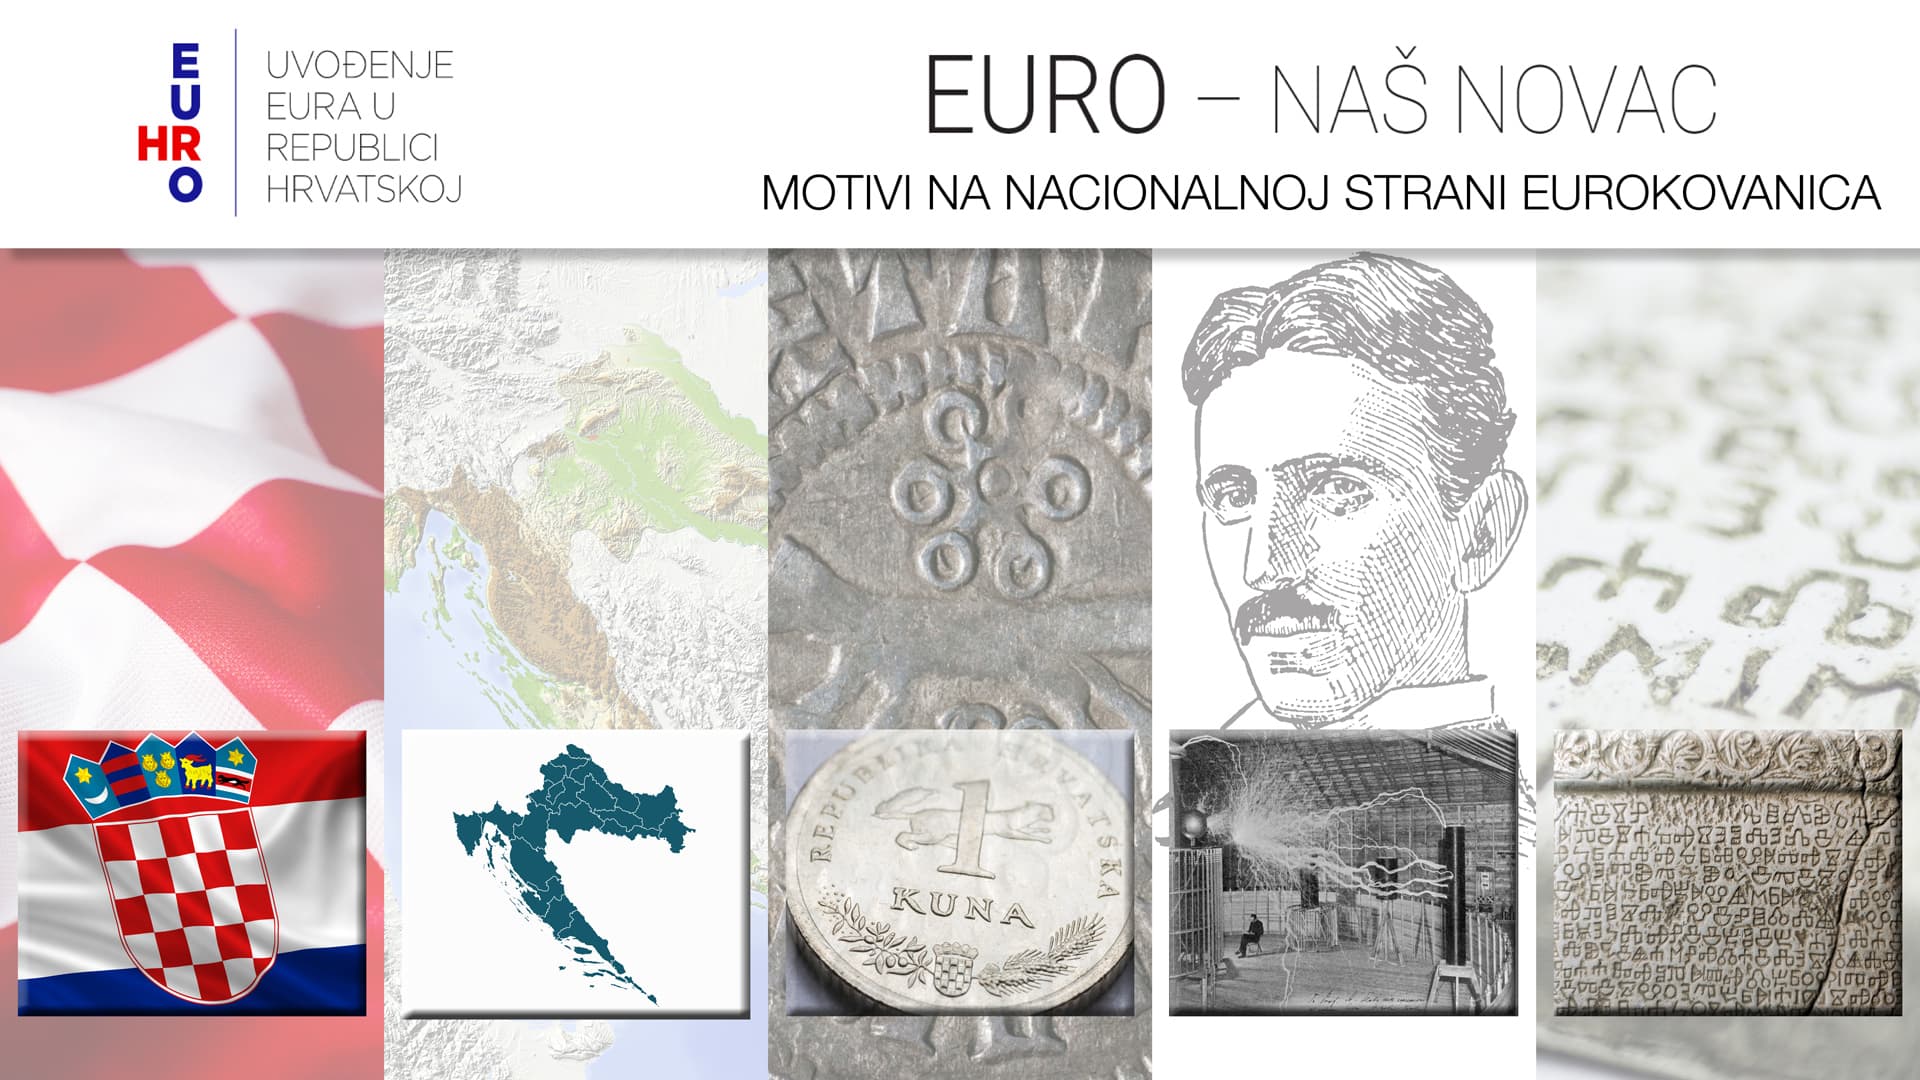 Croatian checkerboard, geographical map of Croatia, marten, Glagolitic script and Nikola Tesla – the motifs proposed to be featured on the Croatian side of euro coins